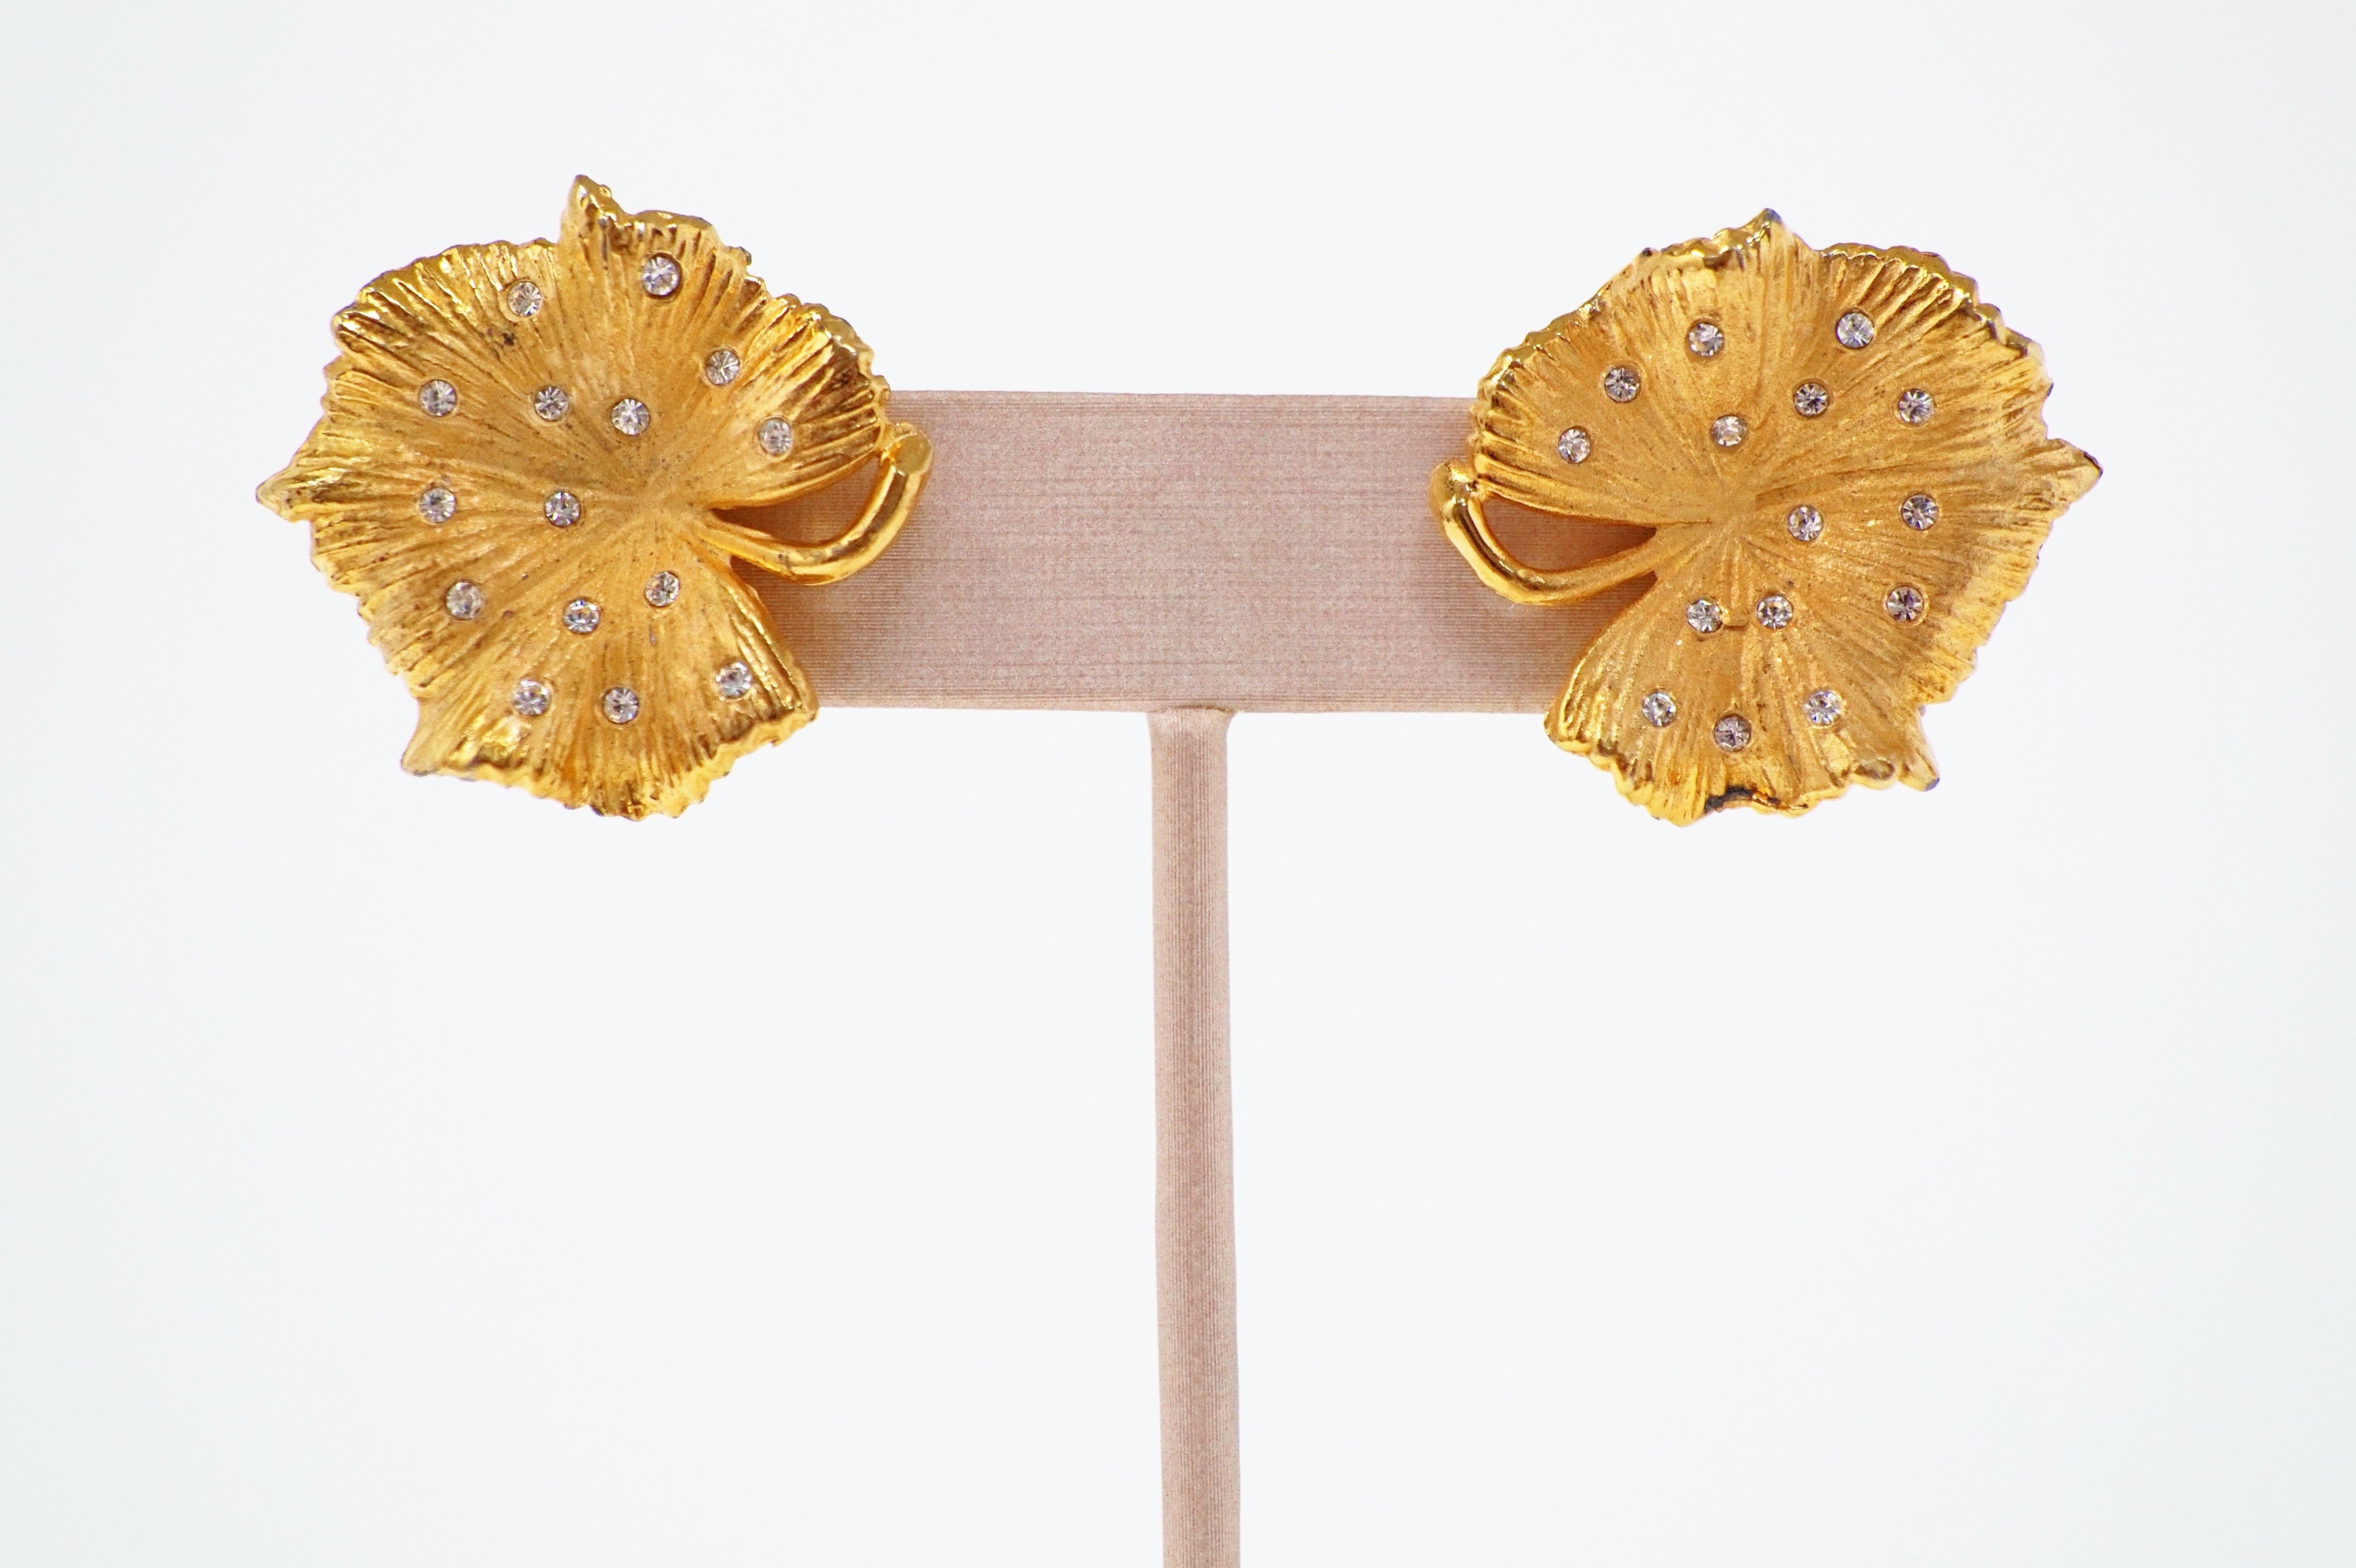 Vintage Gilded Leaf Earrings with Crystal Accents by Claudette, circa 1950s 3